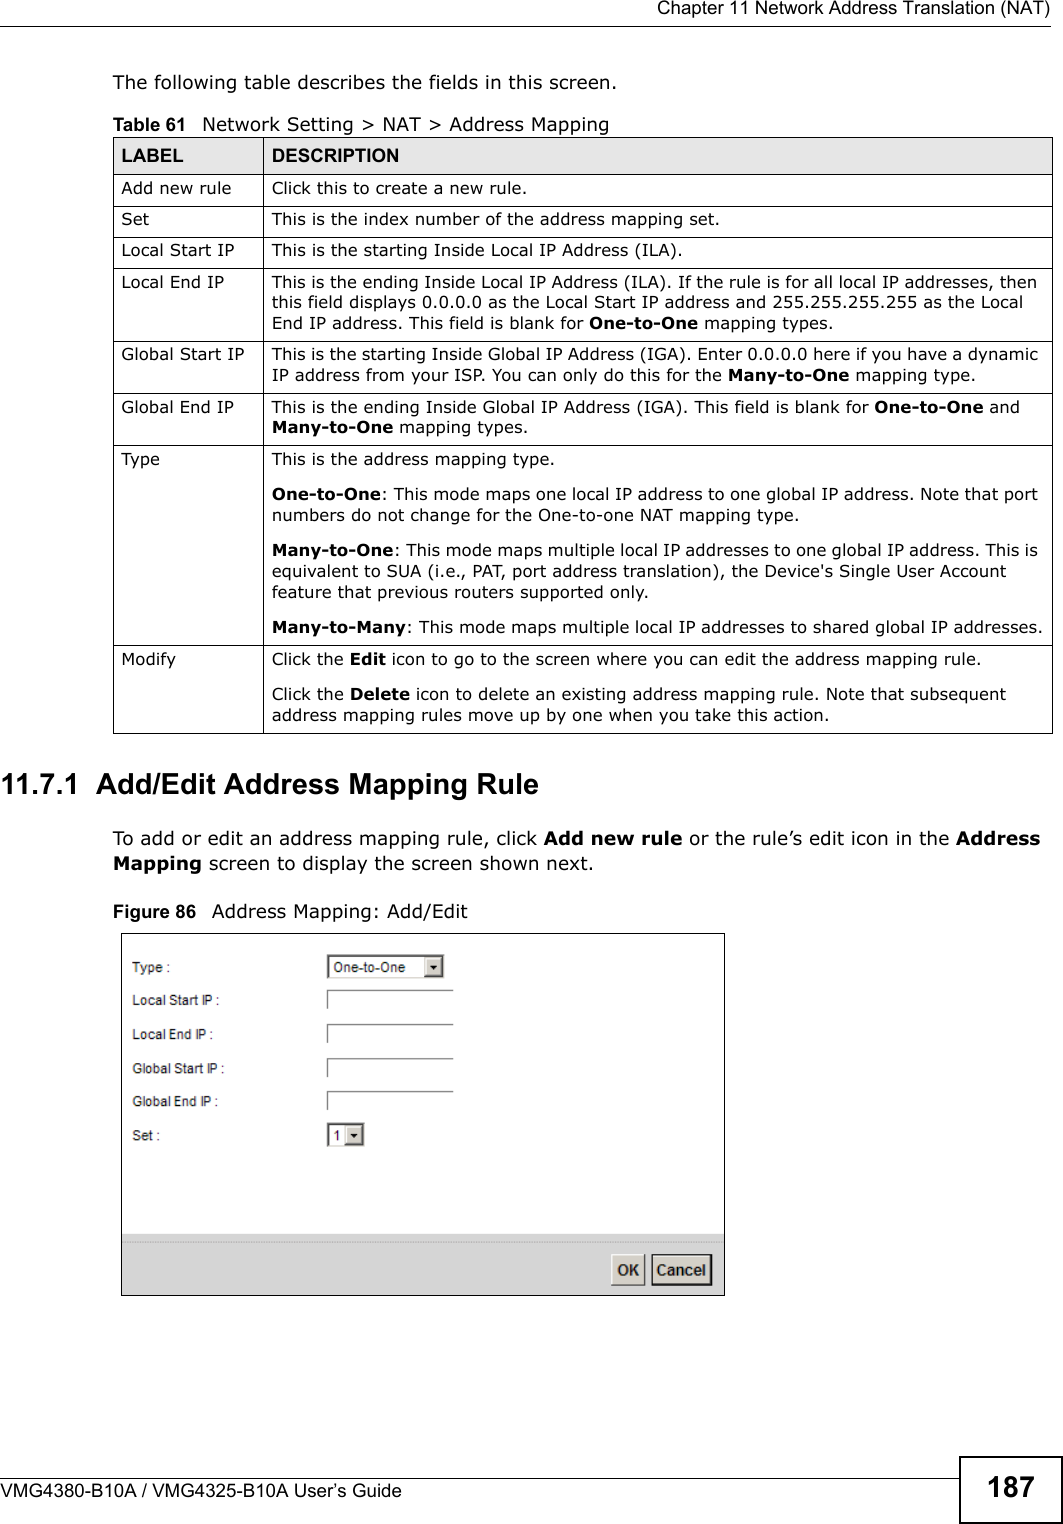  Chapter 11 Network Address Translation (NAT)VMG4380-B10A / VMG4325-B10A User’s Guide 187The following table describes the fields in this screen.11.7.1  Add/Edit Address Mapping RuleTo add or edit an address mapping rule, click Add new rule or the rule’s edit icon in the AddressMapping screen to display the screen shown next. Figure 86   Address Mapping: Add/EditTable 61   Network Setting &gt; NAT &gt; Address MappingLABEL DESCRIPTIONAdd new rule Click this to create a new rule.Set This is the index number of the address mapping set.Local Start IP This is the starting Inside Local IP Address (ILA).Local End IP This is the ending Inside Local IP Address (ILA). If the rule is for all local IP addresses, thenthis field displays 0.0.0.0 as the Local Start IP address and 255.255.255.255 as the LocalEnd IP address. This field is blank for One-to-One mapping types.Global Start IP This is the starting Inside Global IP Address (IGA). Enter 0.0.0.0 here if you have a dynamic IP address from your ISP. You can only do this for the Many-to-One mapping type. Global End IP This is the ending Inside Global IP Address (IGA). This field is blank for One-to-One and Many-to-One mapping types.Type This is the address mapping type.One-to-One: This mode maps one local IP address to one global IP address. Note that portnumbers do not change for the One-to-one NAT mapping type.Many-to-One: This mode maps multiple local IP addresses to one global IP address. This is equivalent to SUA (i.e., PAT, port address translation), the Device&apos;s Single User Account feature that previous routers supported only. Many-to-Many: This mode maps multiple local IP addresses to shared global IP addresses.Modify Click the Edit icon to go to the screen where you can edit the address mapping rule.Click the Delete icon to delete an existing address mapping rule. Note that subsequentaddress mapping rules move up by one when you take this action.